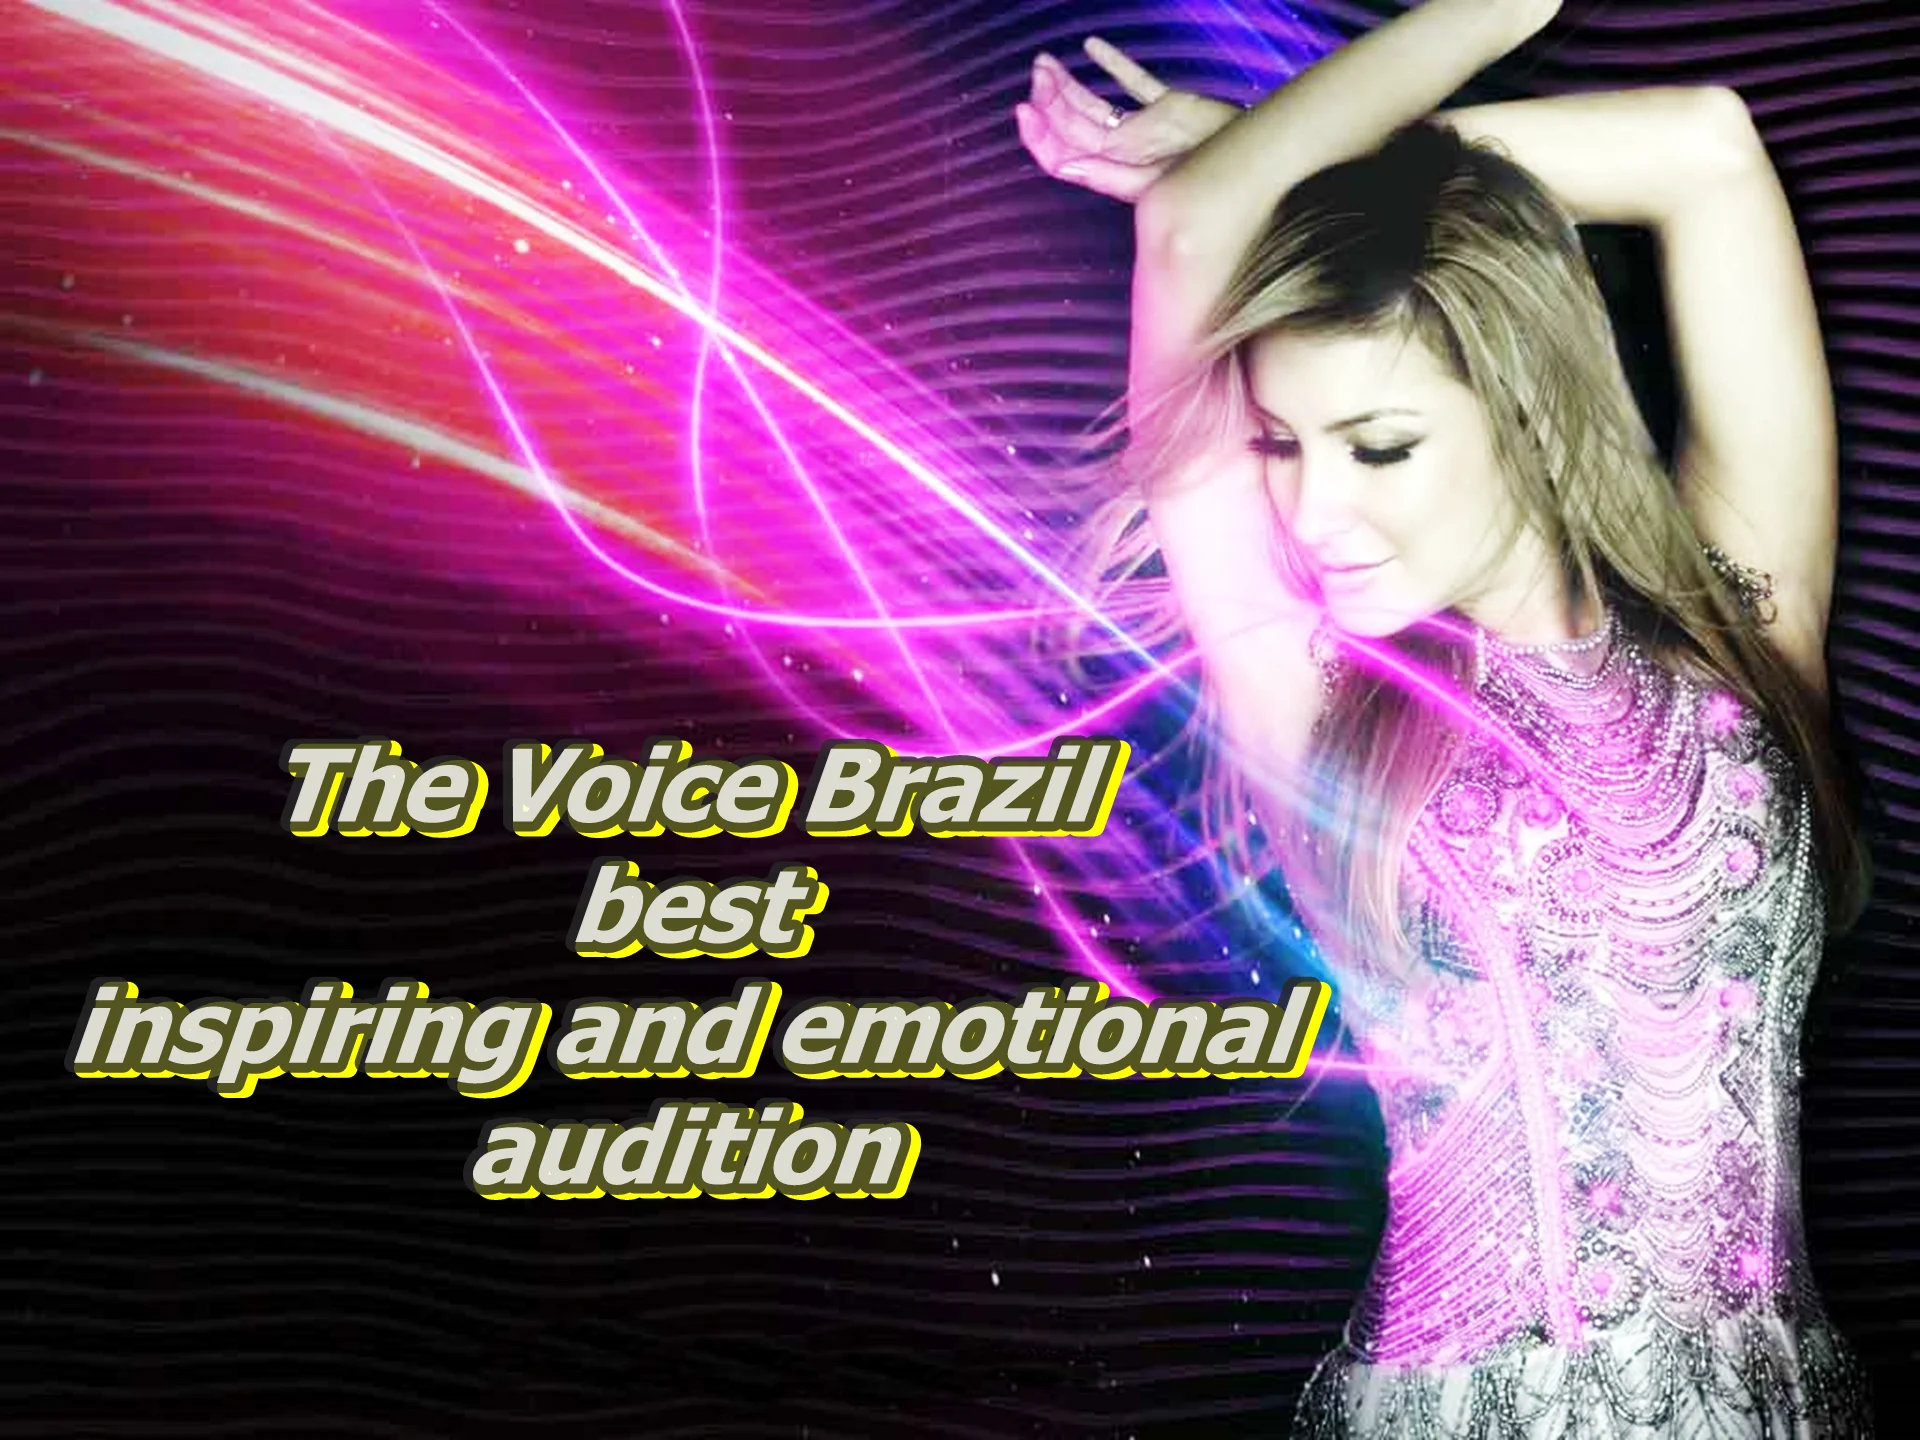 The Voice Brazil - Best inspiring and emotional audition on Vimeo